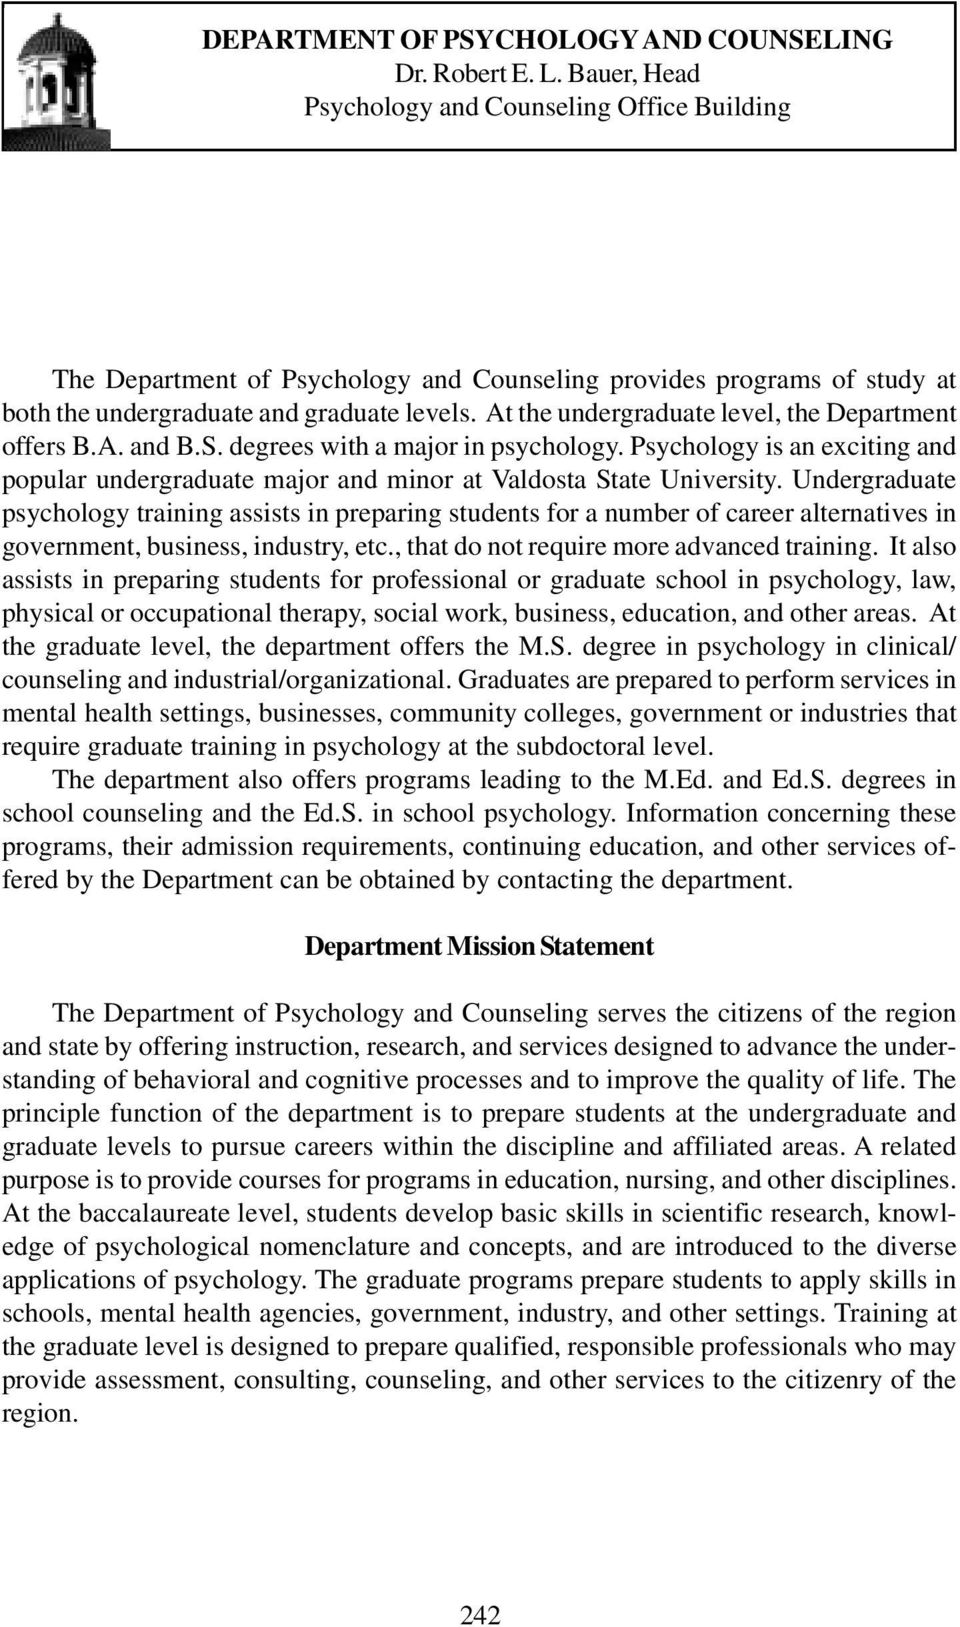 At the undergraduate level, the Department offers B.A. and B.S. degrees with a major in psychology. Psychology is an exciting and popular undergraduate major and minor at Valdosta State University.